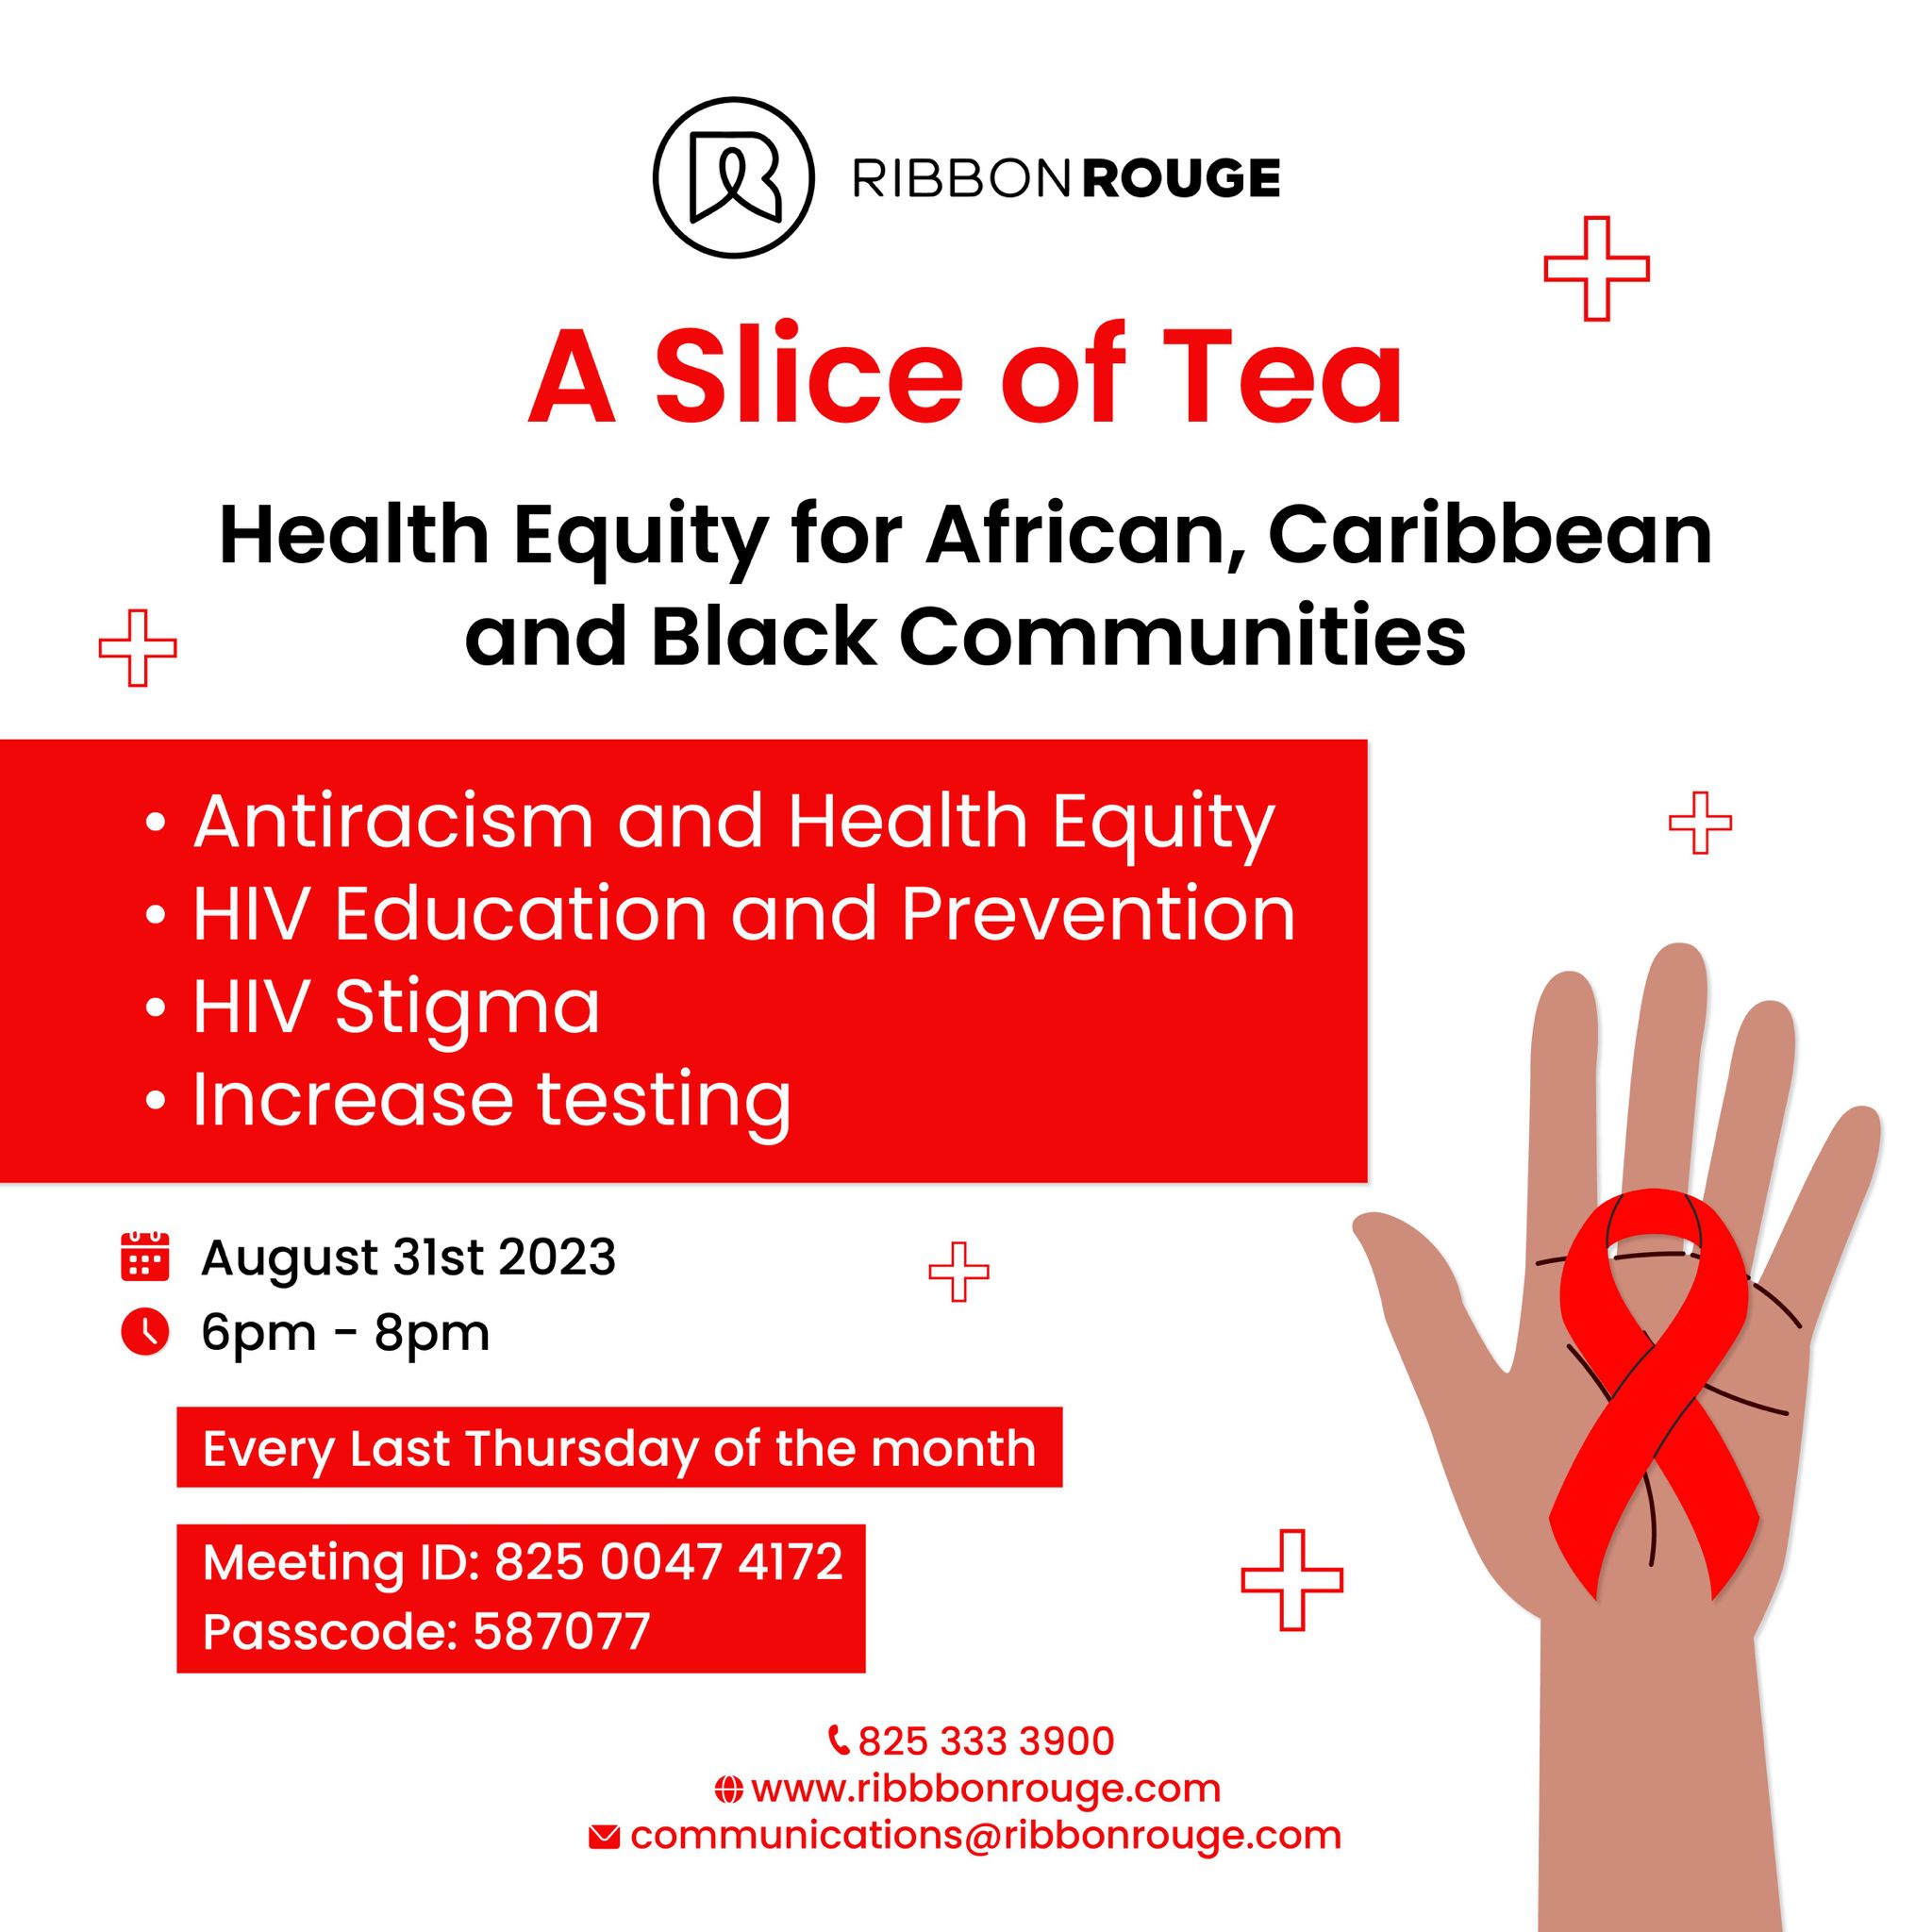 Attend an event to learn more about HIV prevention in ACB communities